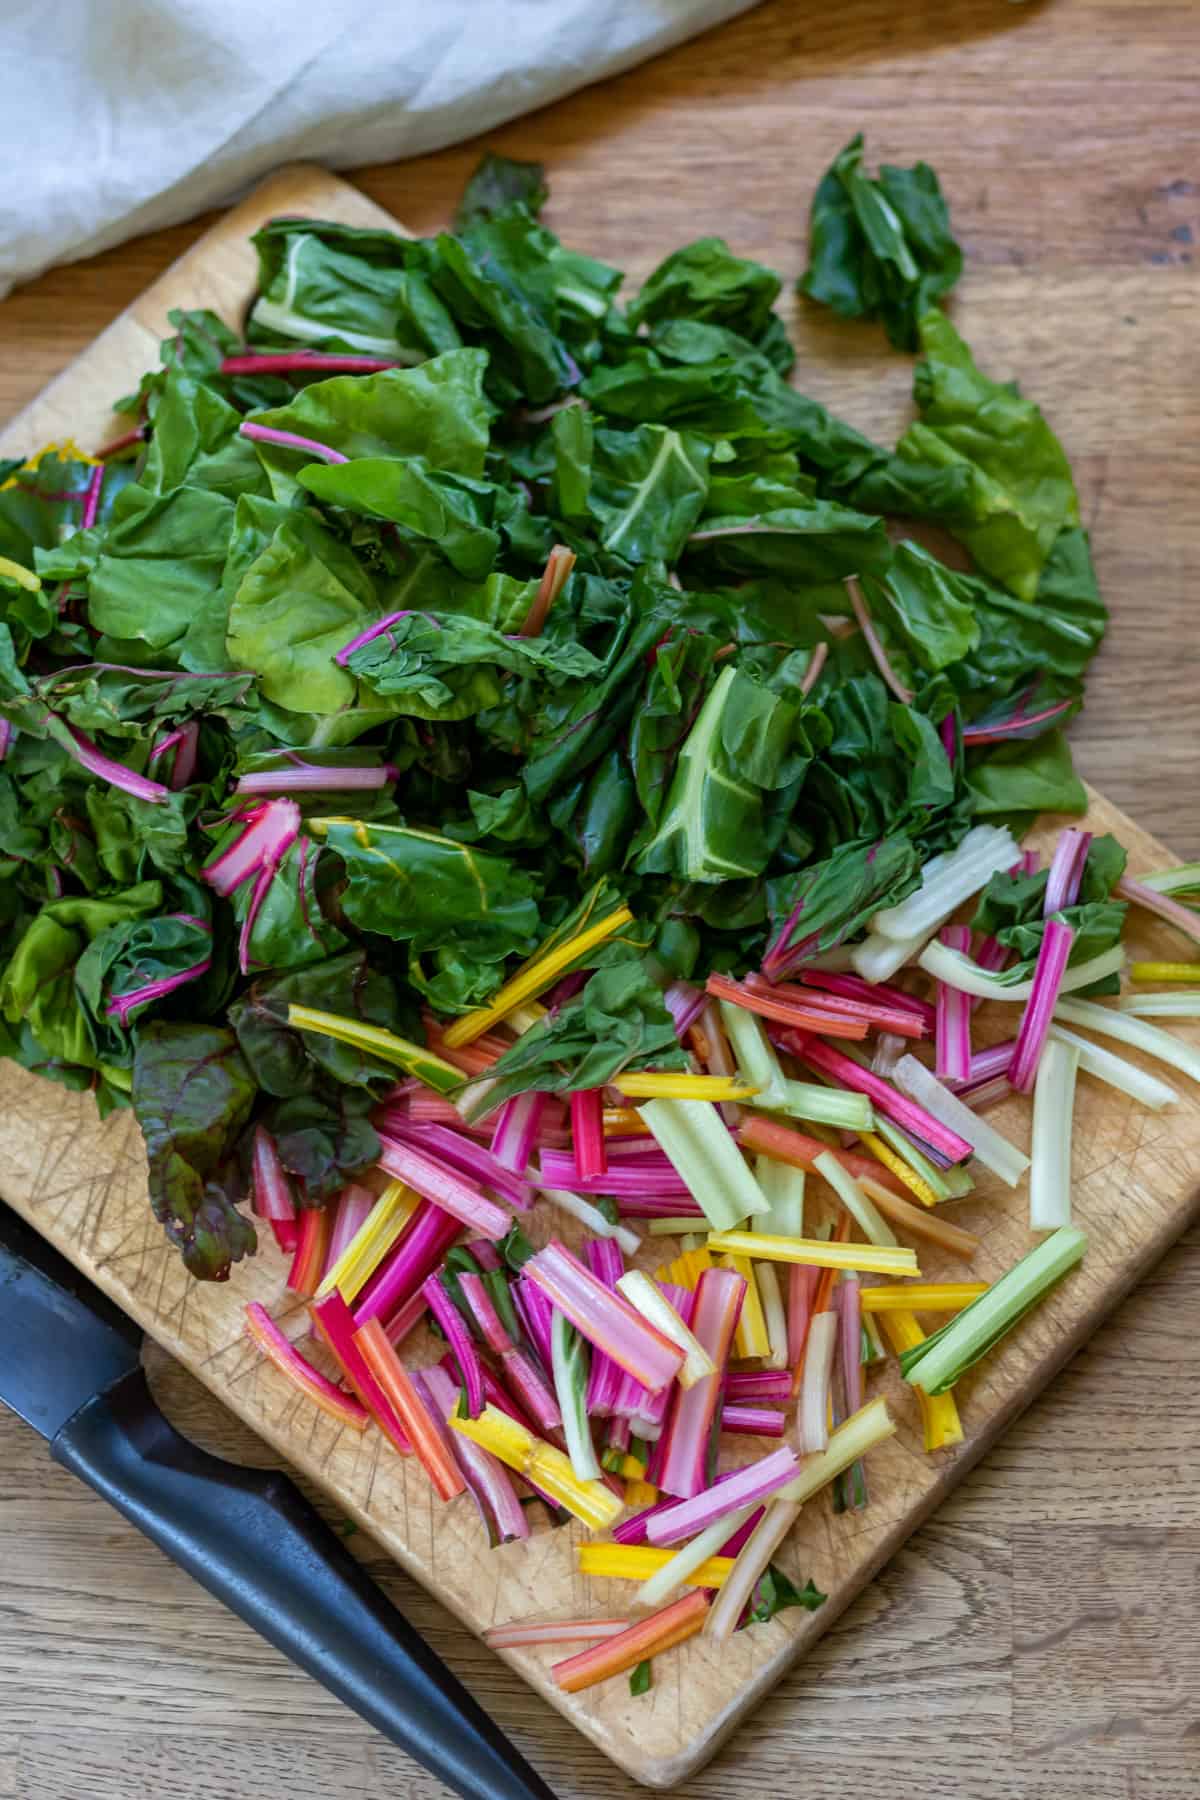 Chopping the chard leaves and stems.